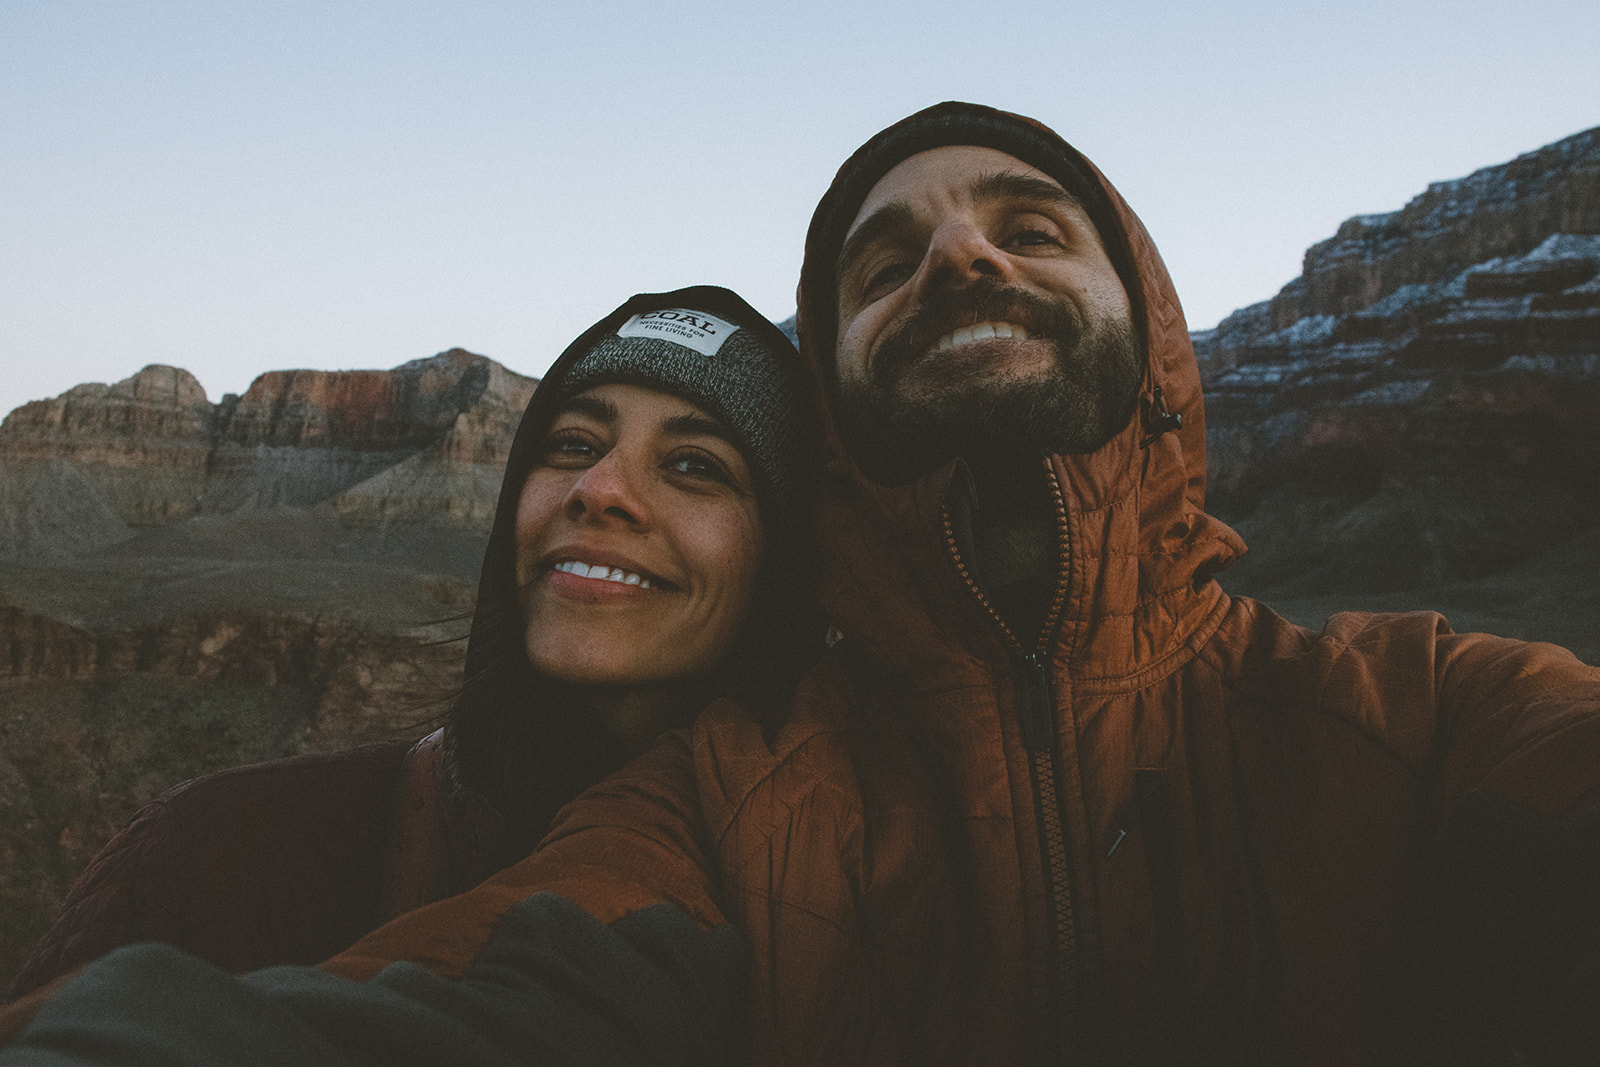 myself and my boyfriend Bob taking a selfie during the middle of hiking the Grand Canyon. We are grinning from ear to ear in awe of this trip.